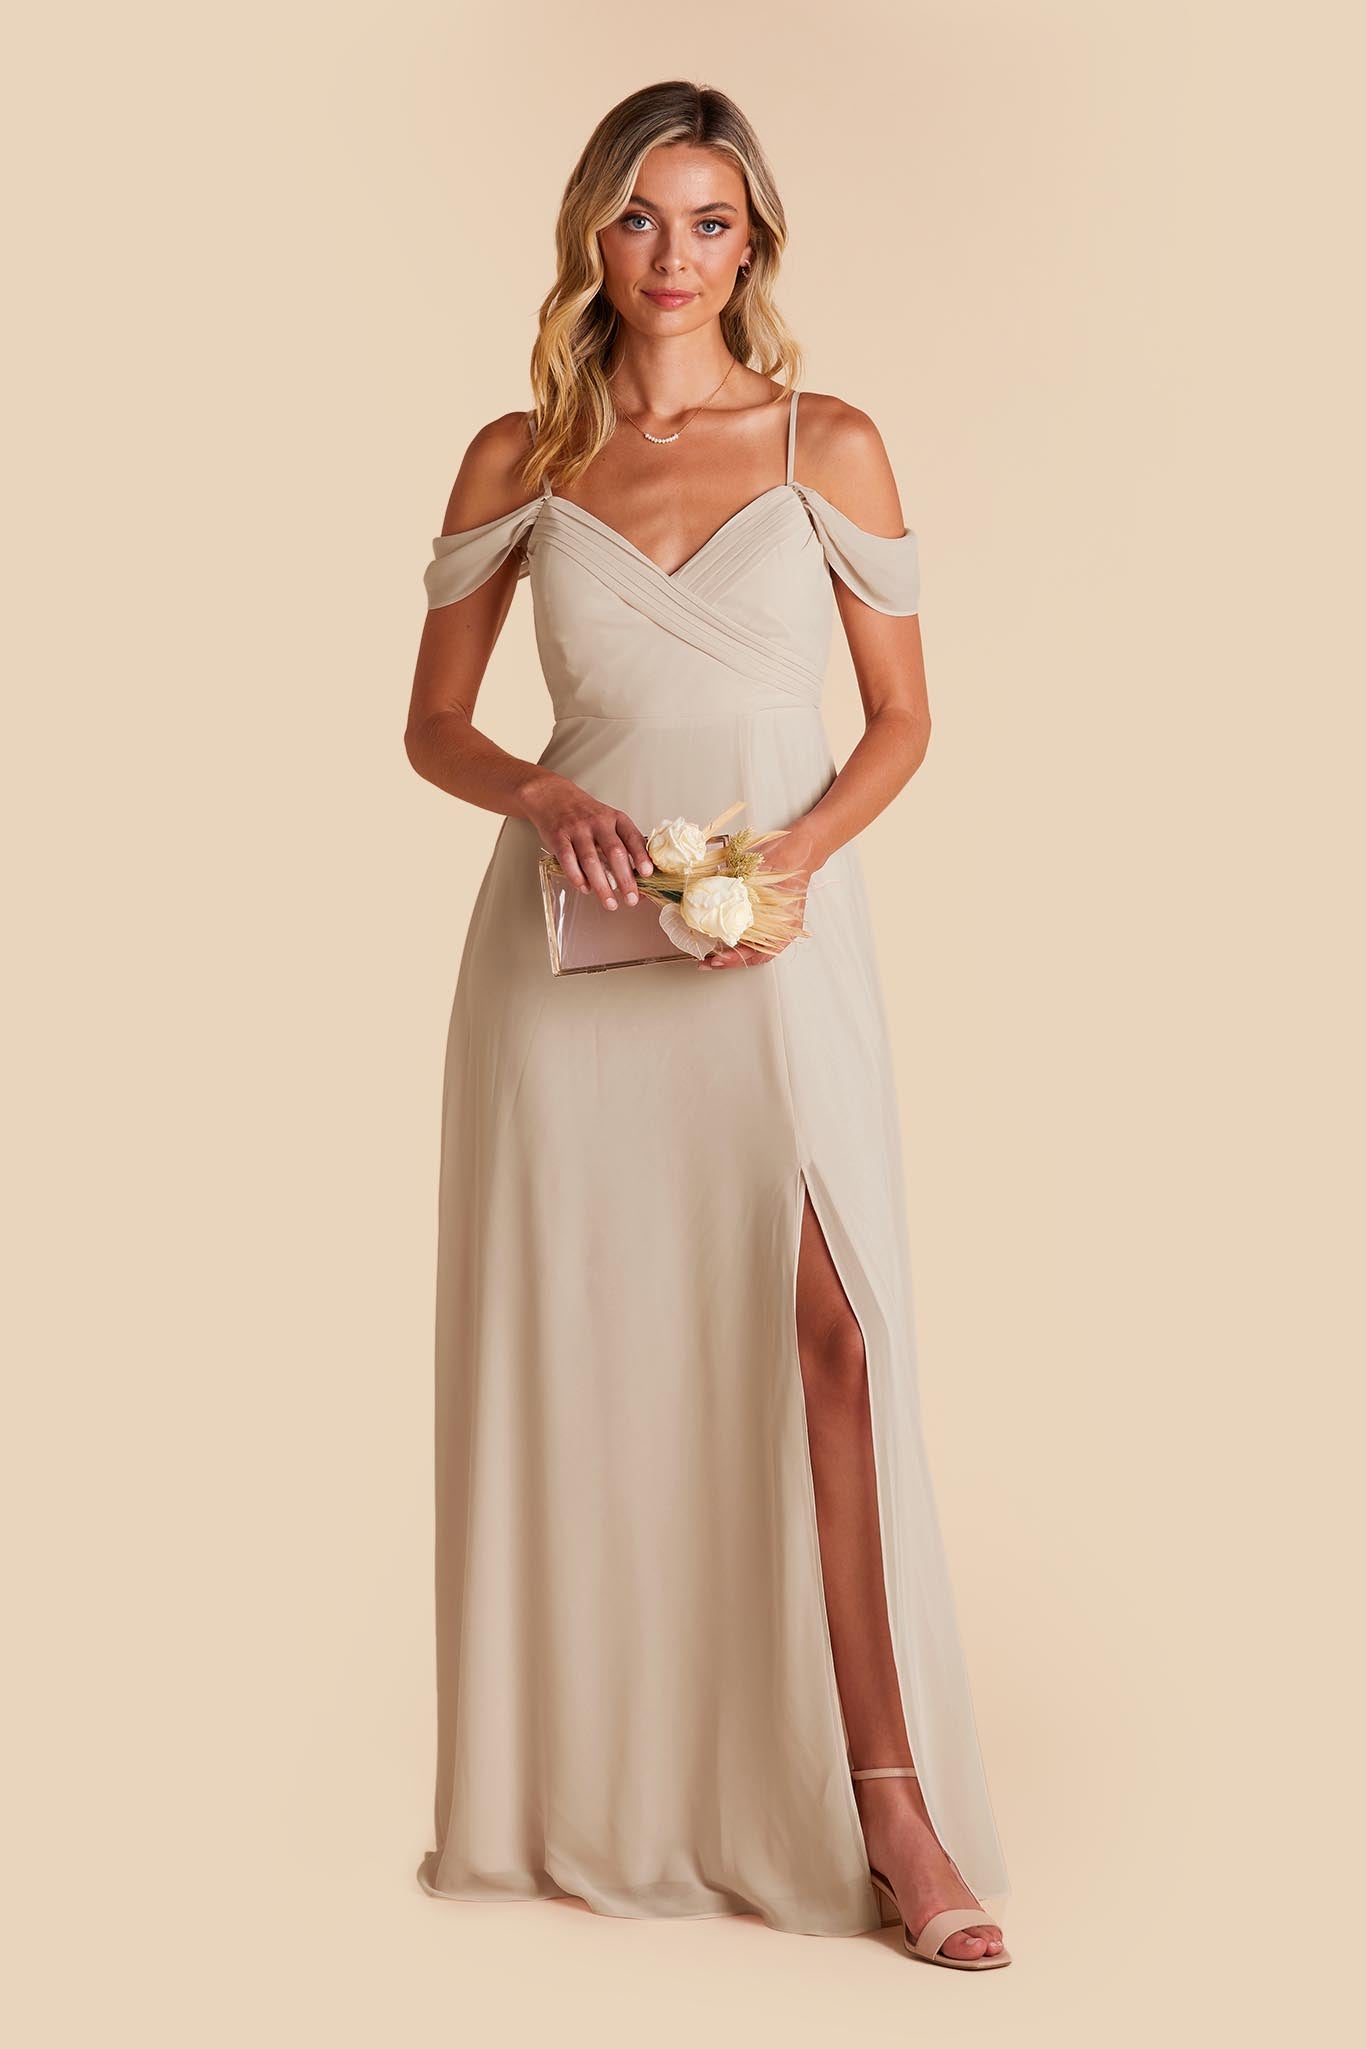 Neutral Champagne Spence Convertible Dress by Birdy Grey